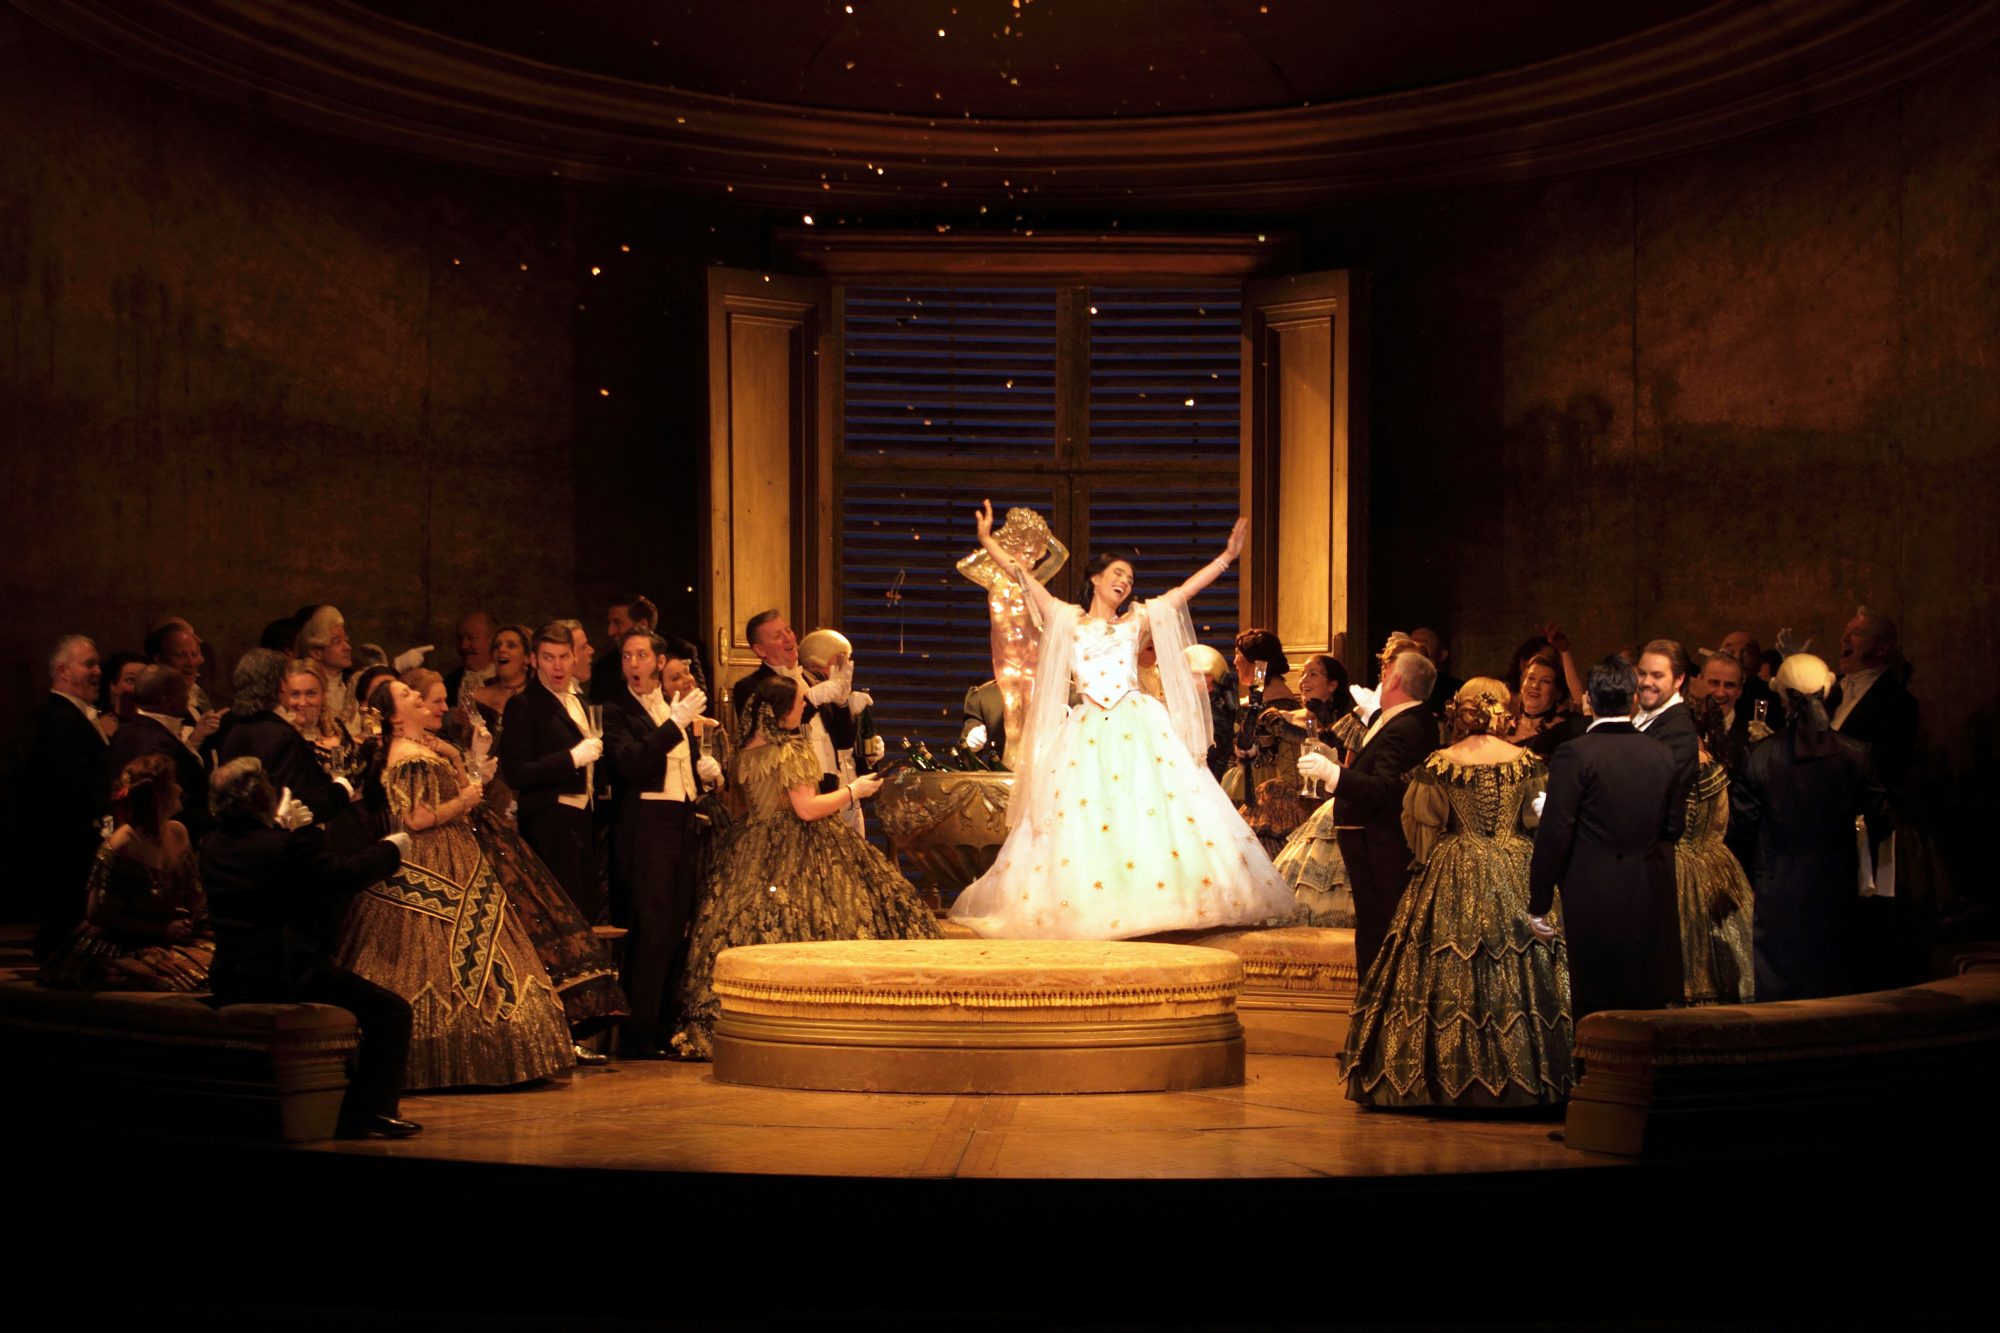 An opera singer in a white ball gown being cheered by the ensemble surrounding her.